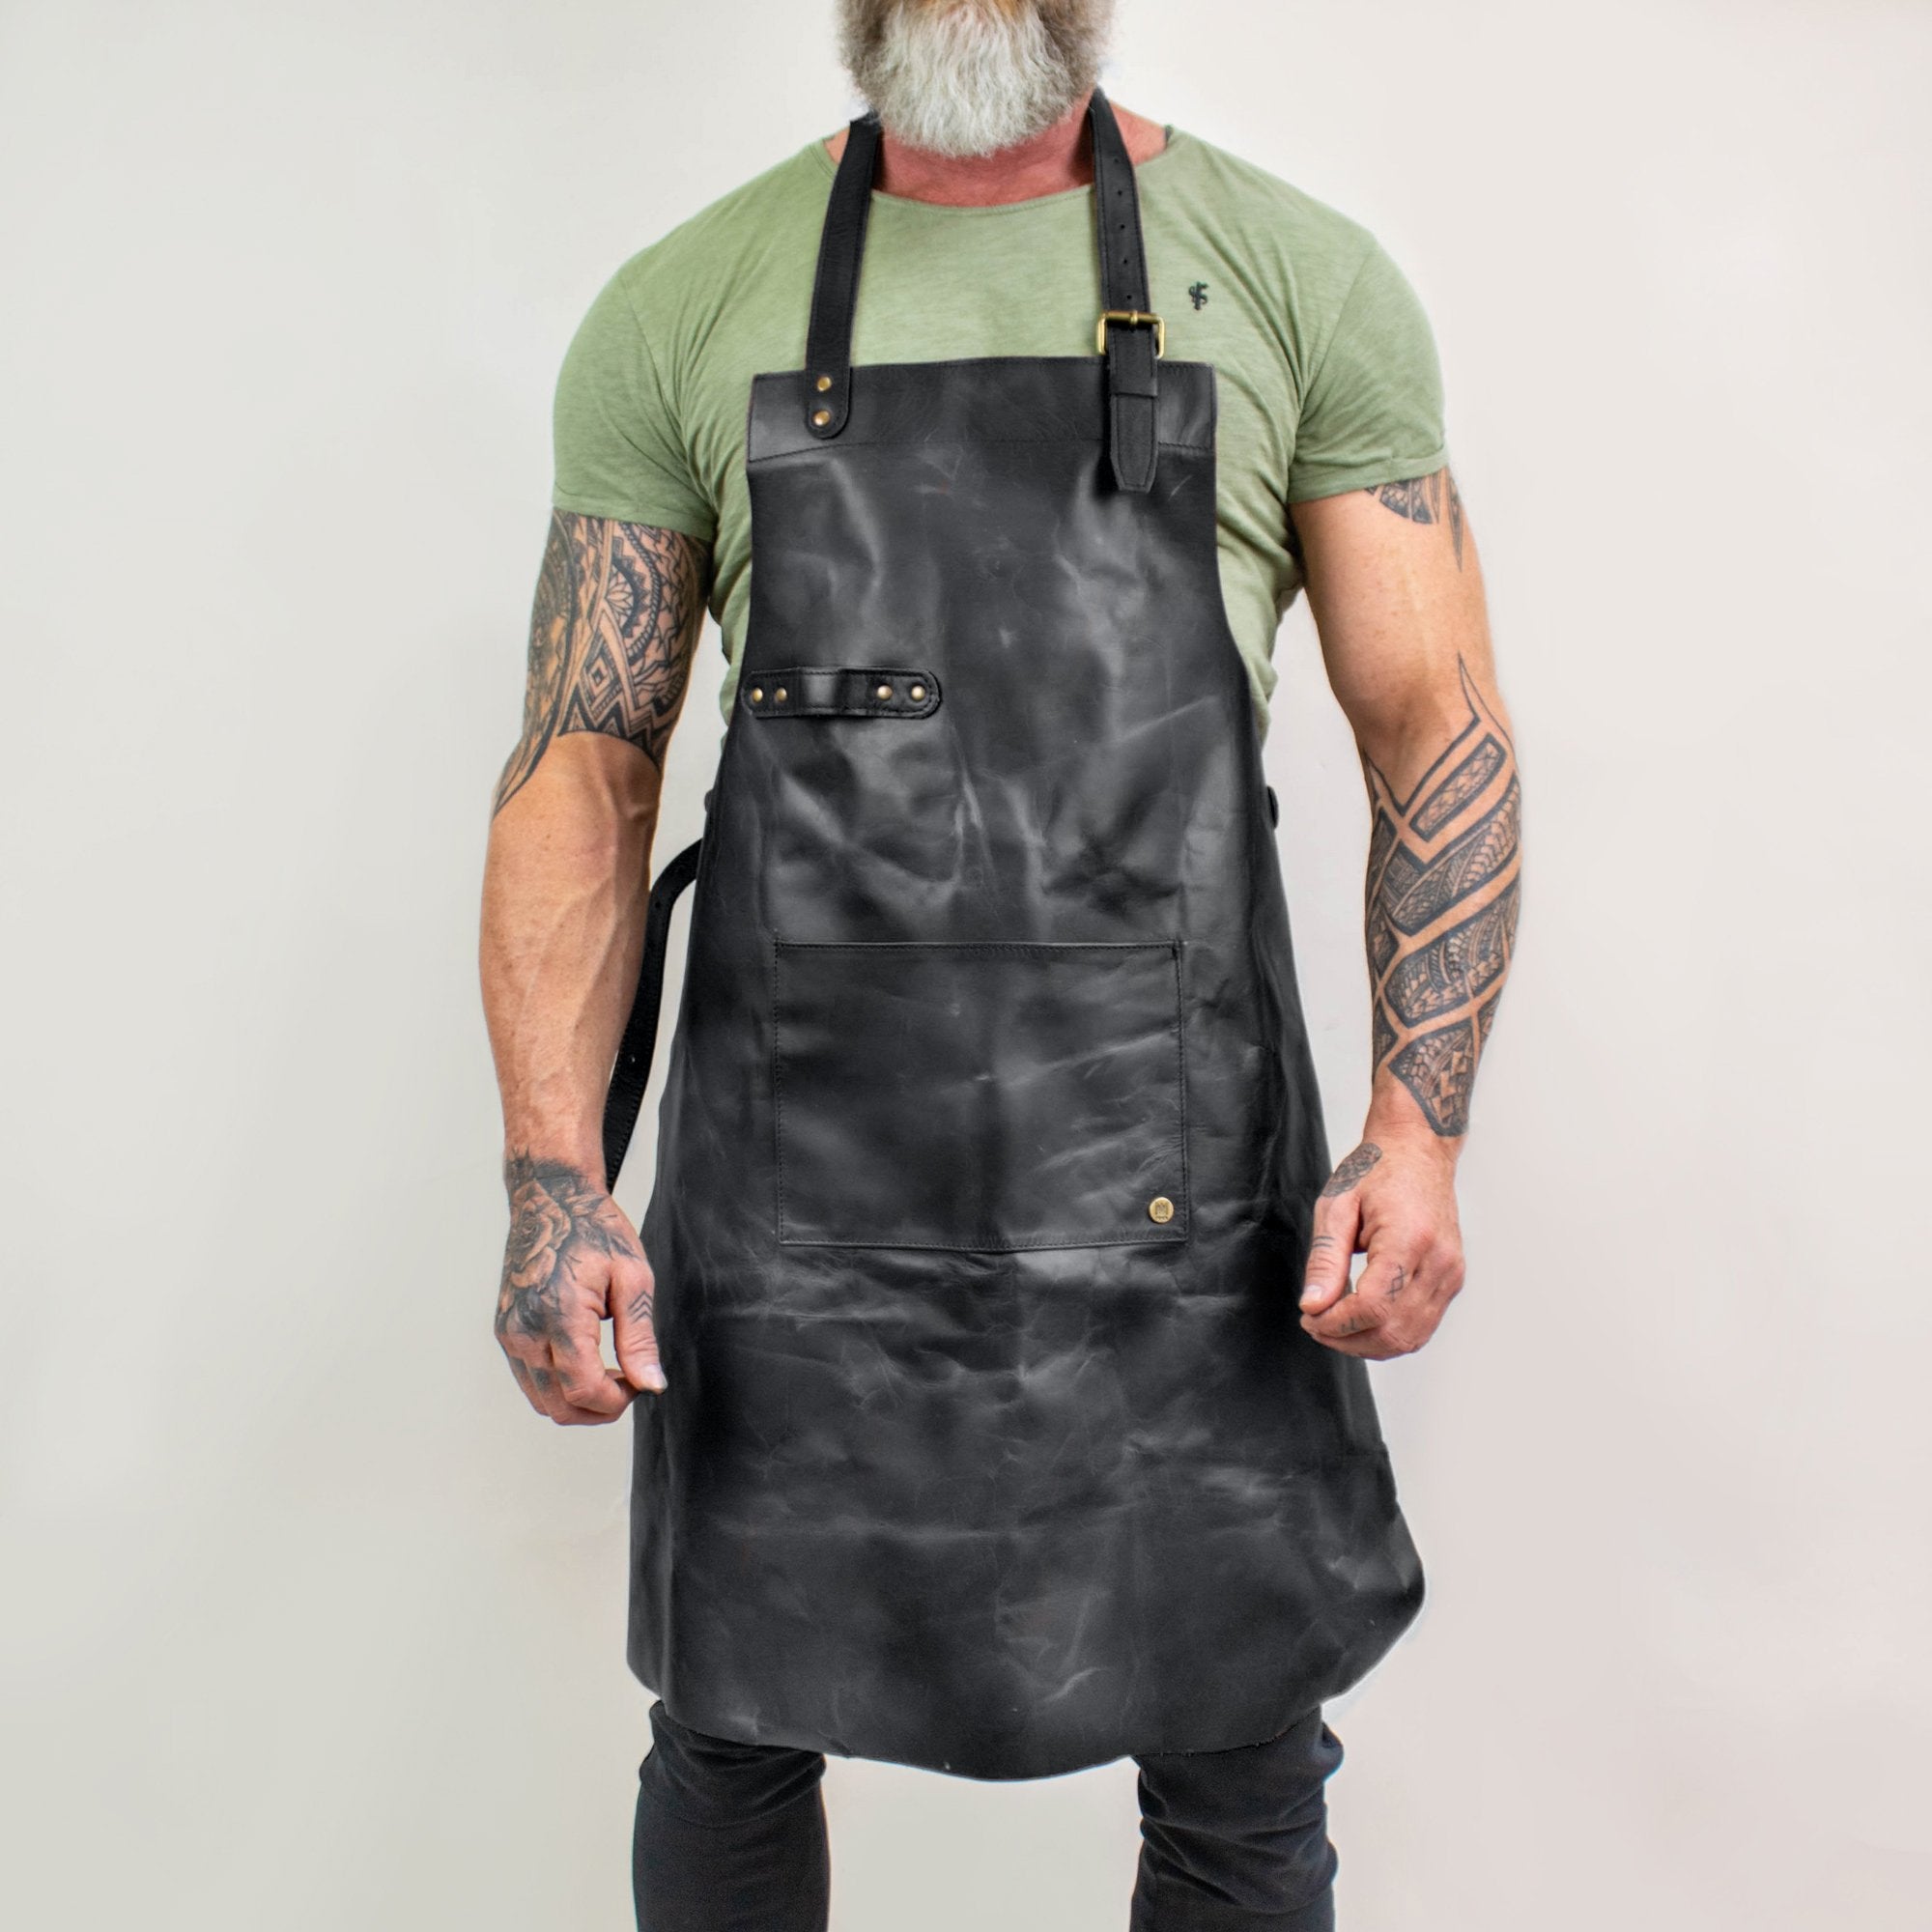 Full Grain Leather Aprons - Personalized For Hobbyists, Blacksmith,  Bartender, Chef, Woodworking, Mens, Womens – MAHI Leather